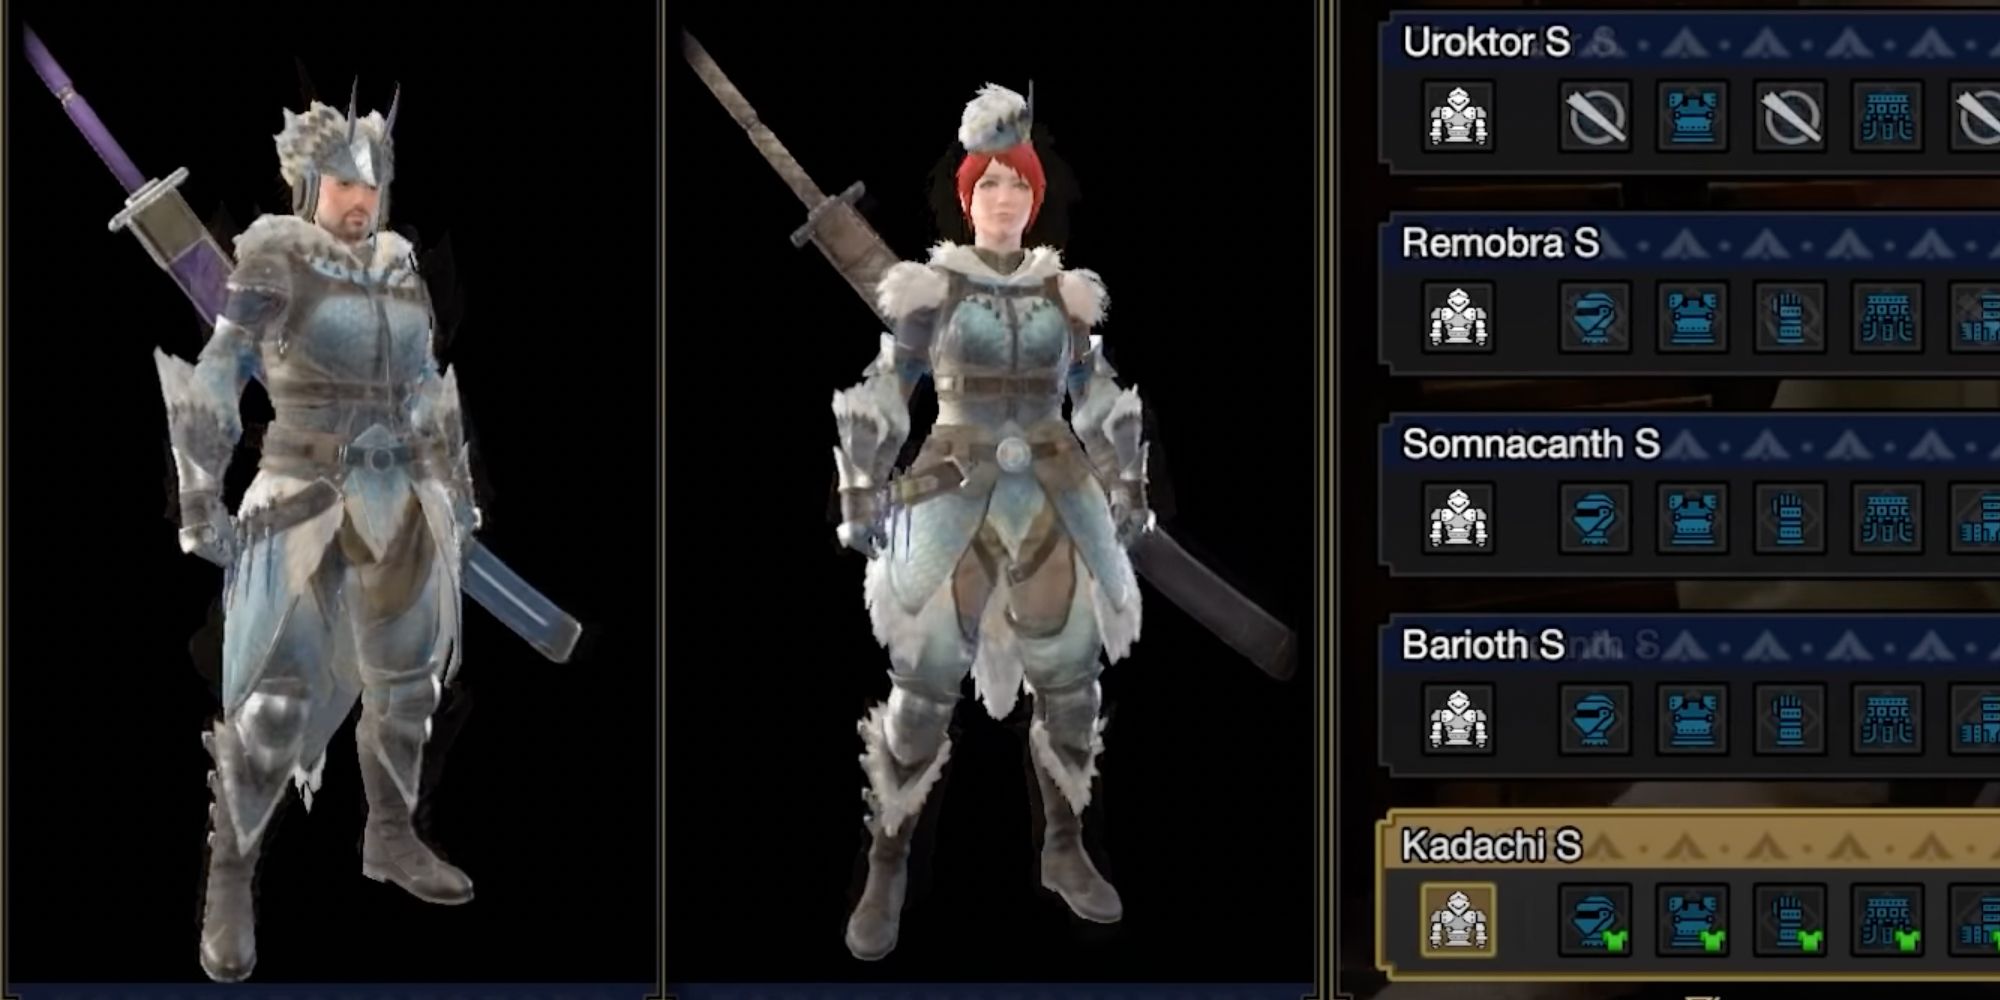 Armor selection screen showing both gendered Hunters in Kadachi armor